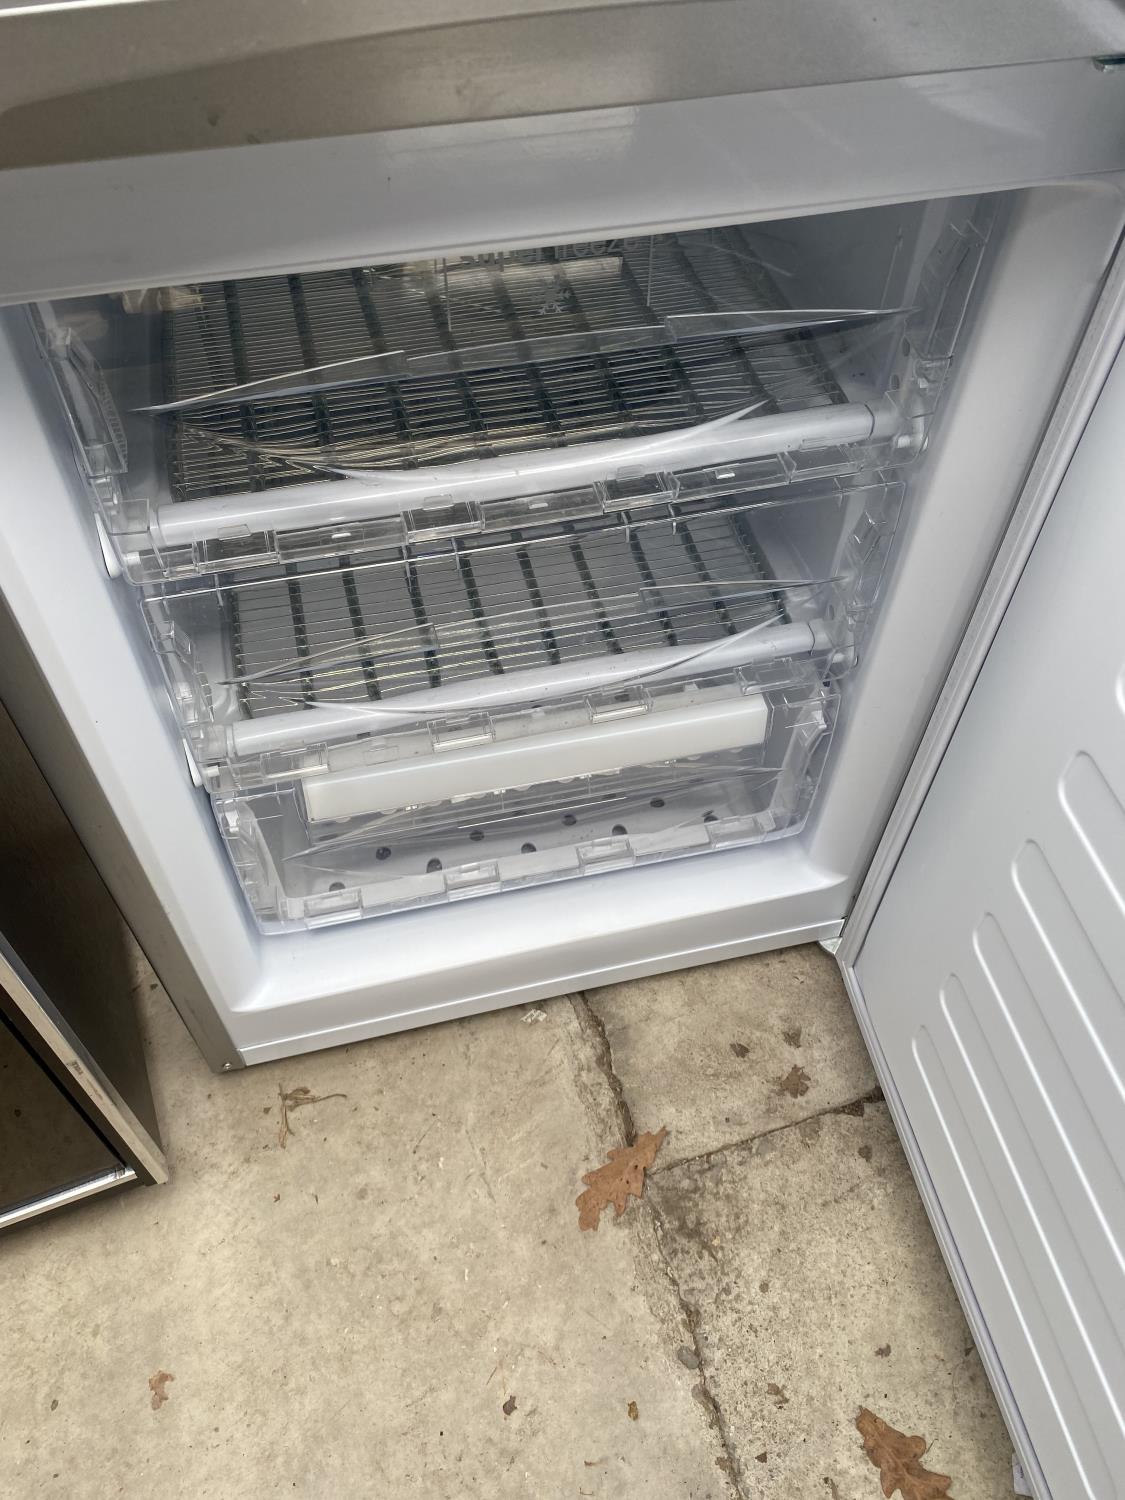 A SILVER HOTPOINT FRIDGE FREEZER BELIEVED IN WORKING ORDER BUT NO WARRANTY - Image 5 of 5